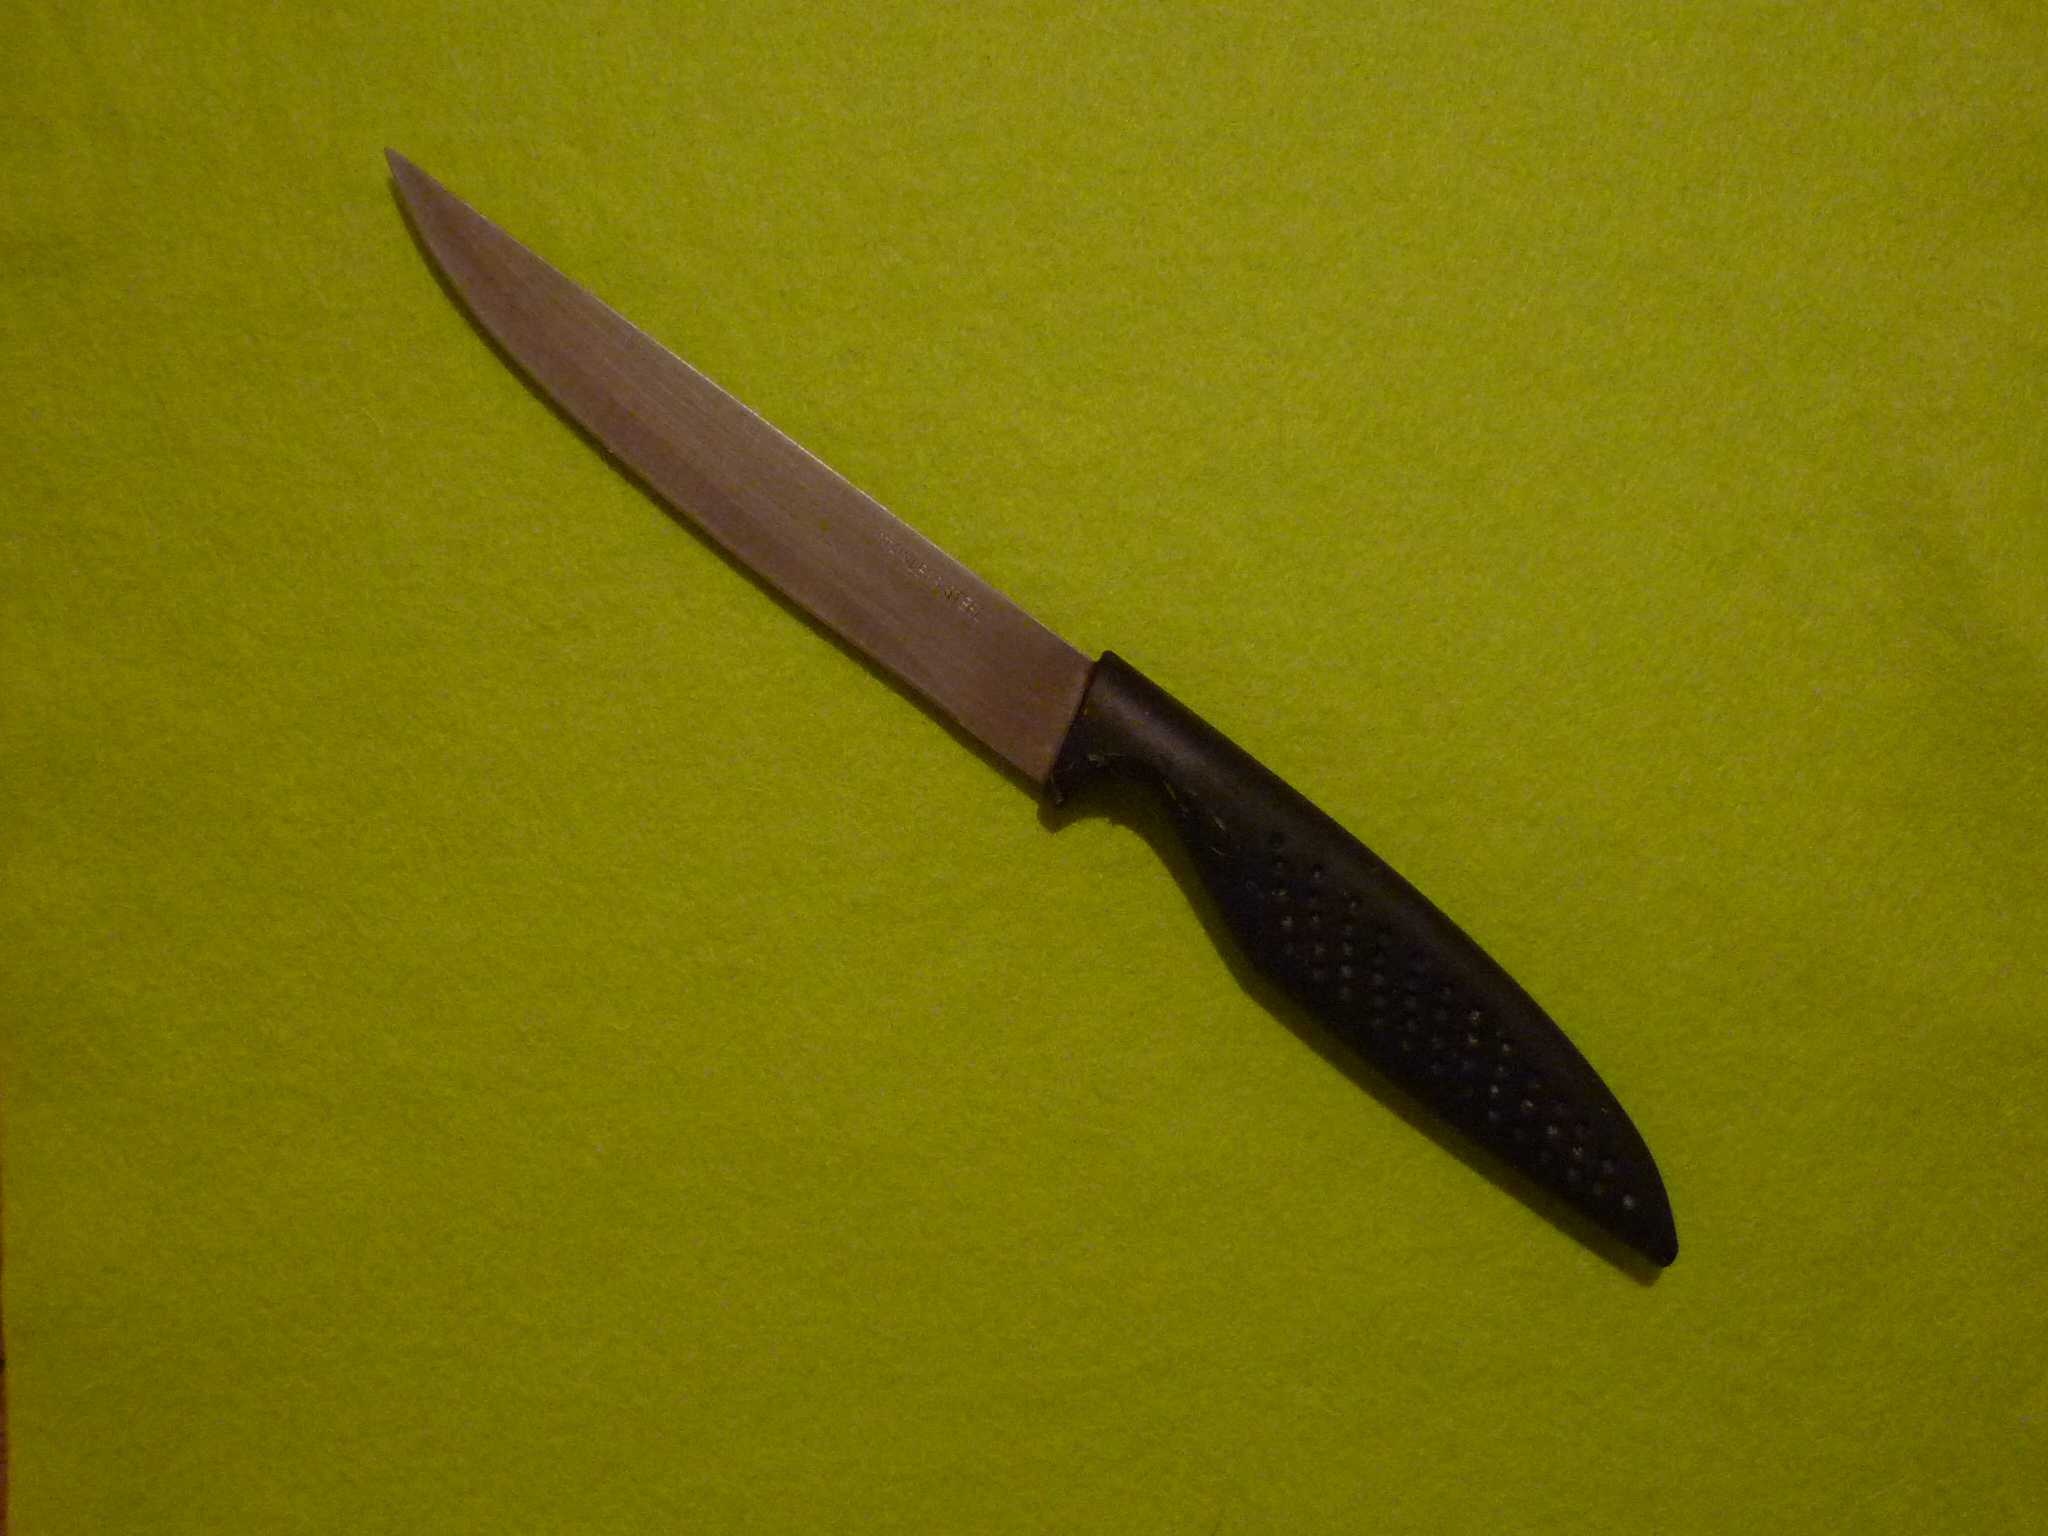 Kitchen knife image classifcation dataset for machine learning